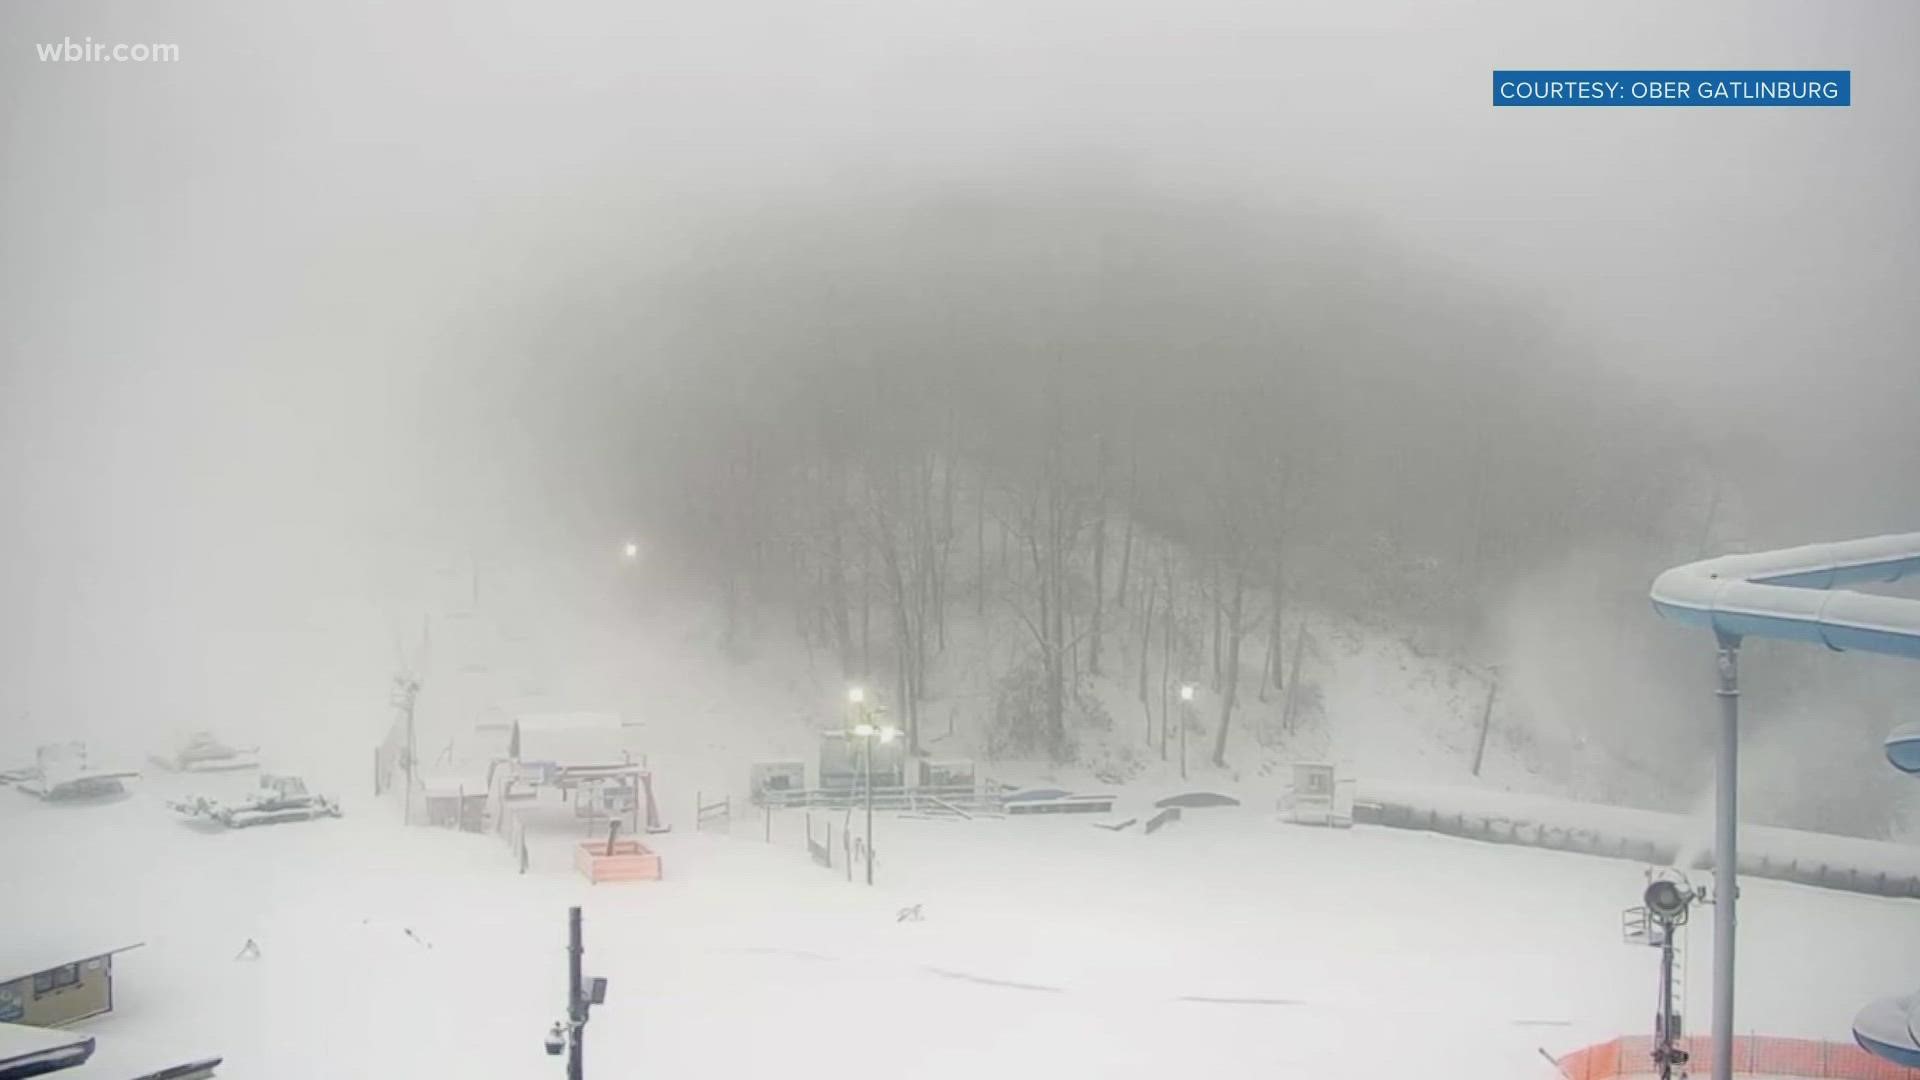 Ober Gatlinburg had been waiting that snow and cooler temperatures to arrive so they could welcome in skiers this winter.